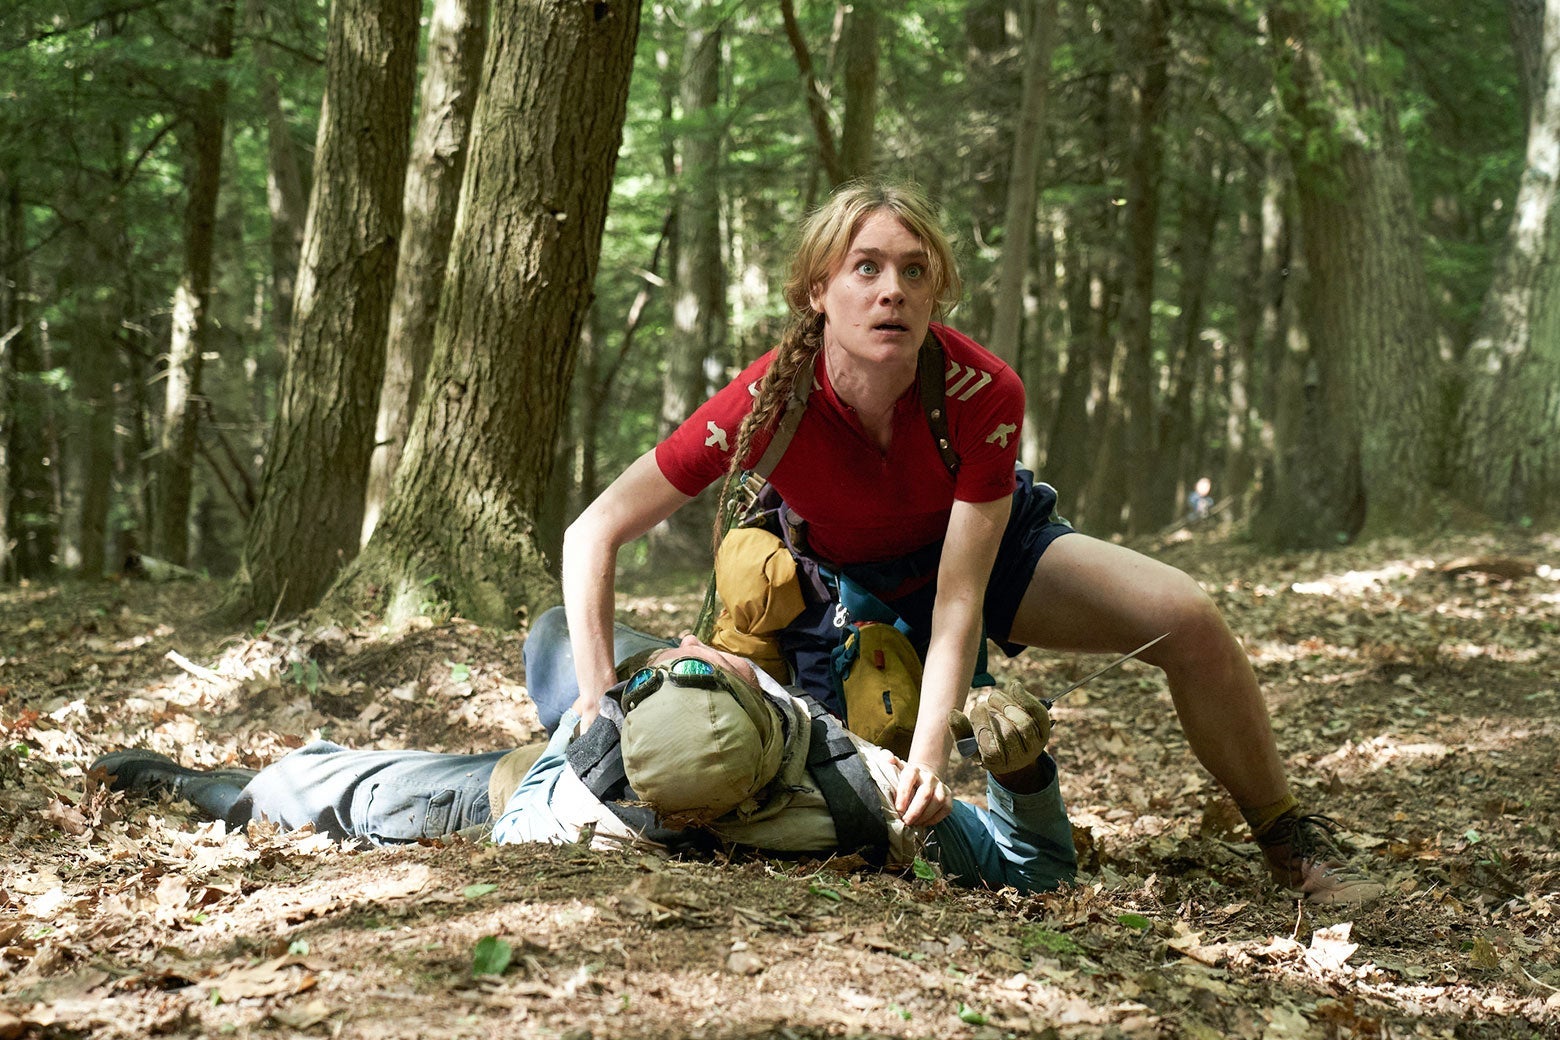 Protagonist Kirsten crouches over the supine figure of a person in the woods.